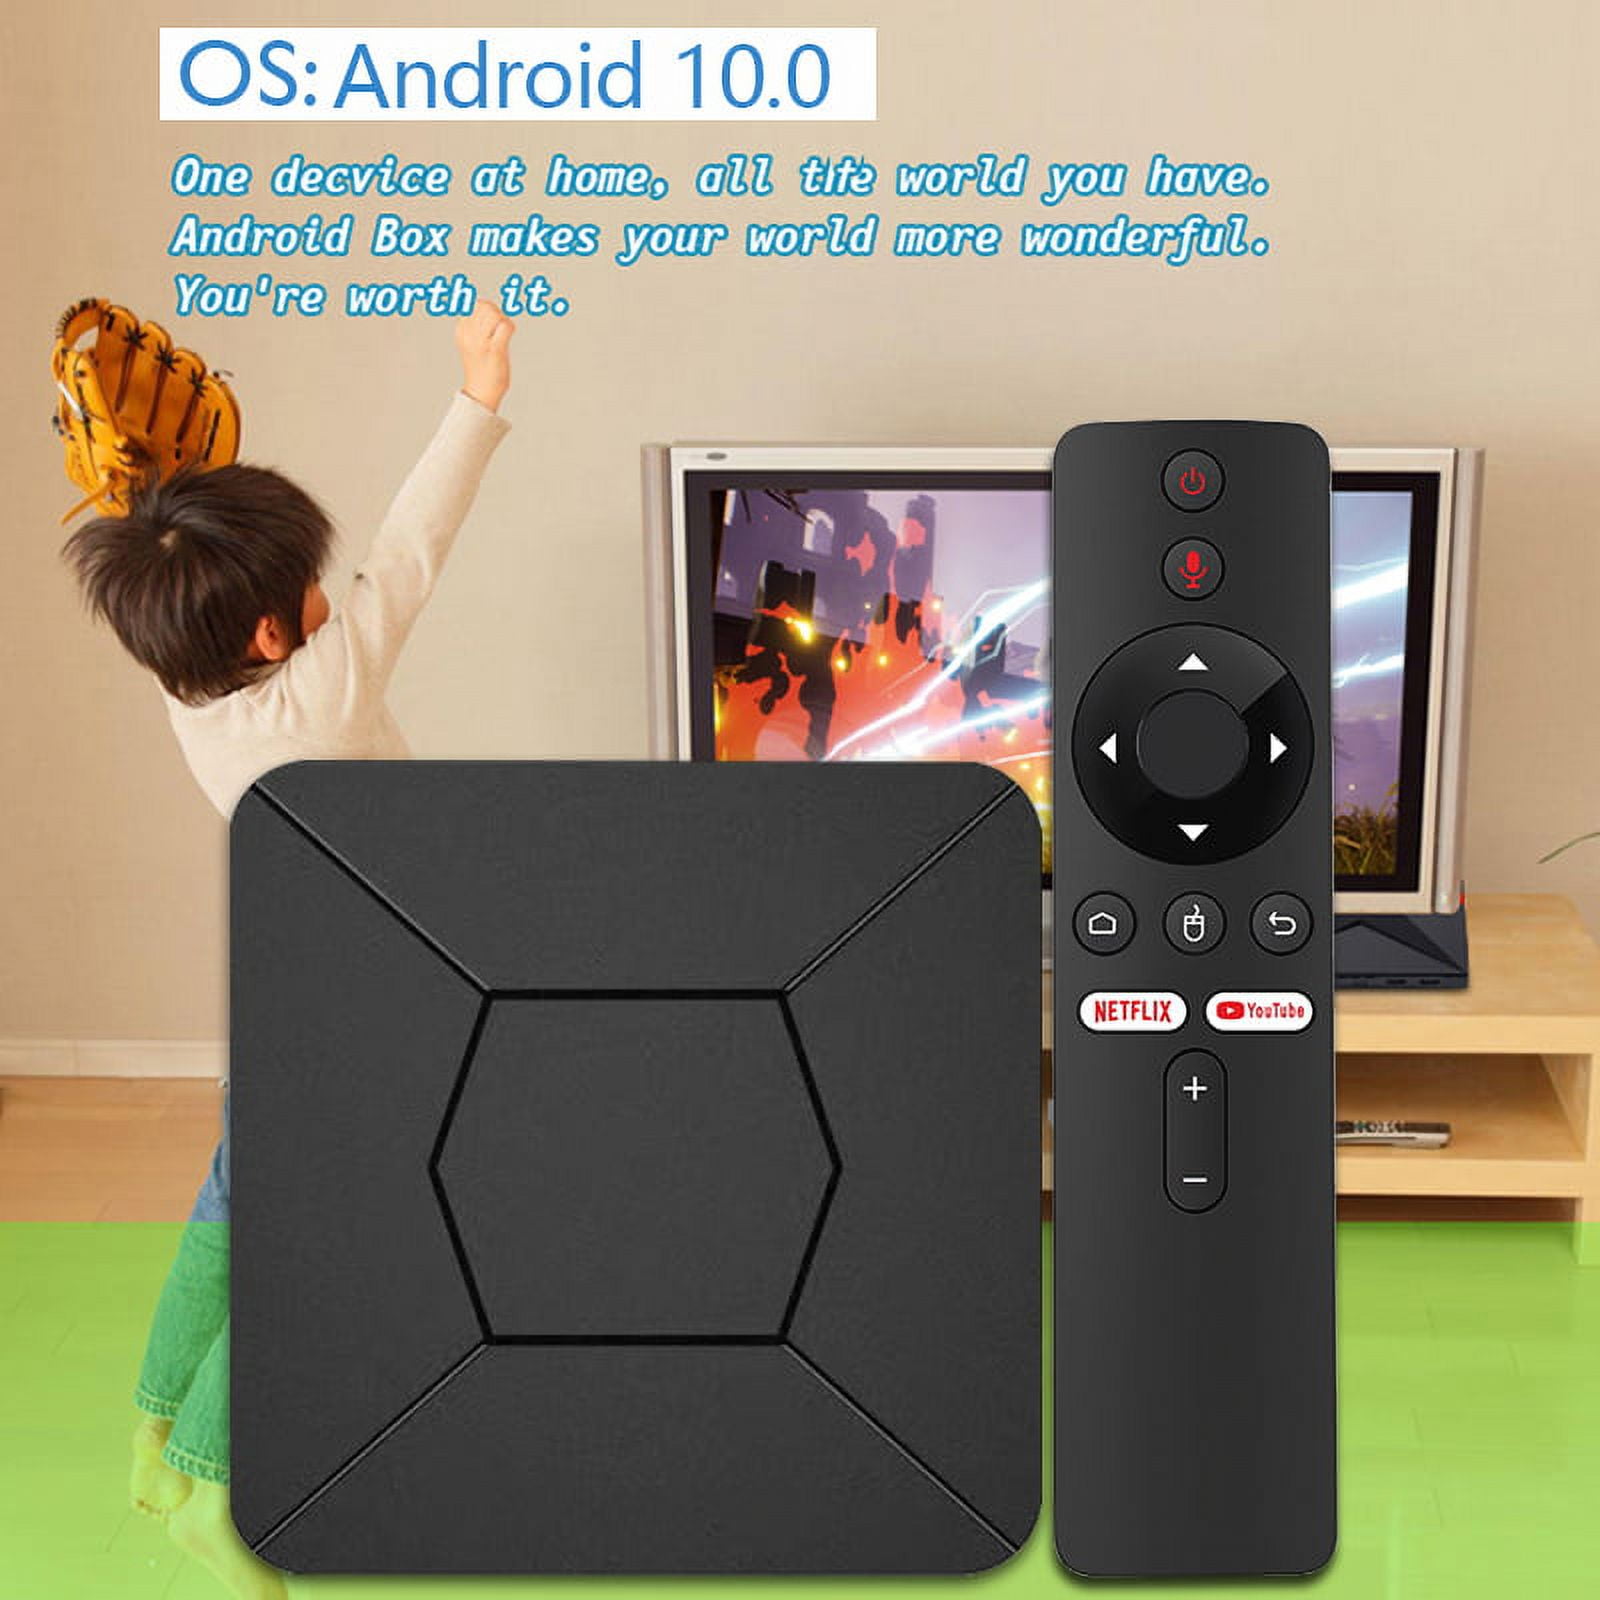 BOXPUT iATV Q5 Plus Android TV Box 2023 4K TV Box with Android 11.0 Smart  TV Box Amlogic S905W2 Chip Android Box with BLE Voice Remote Set Top